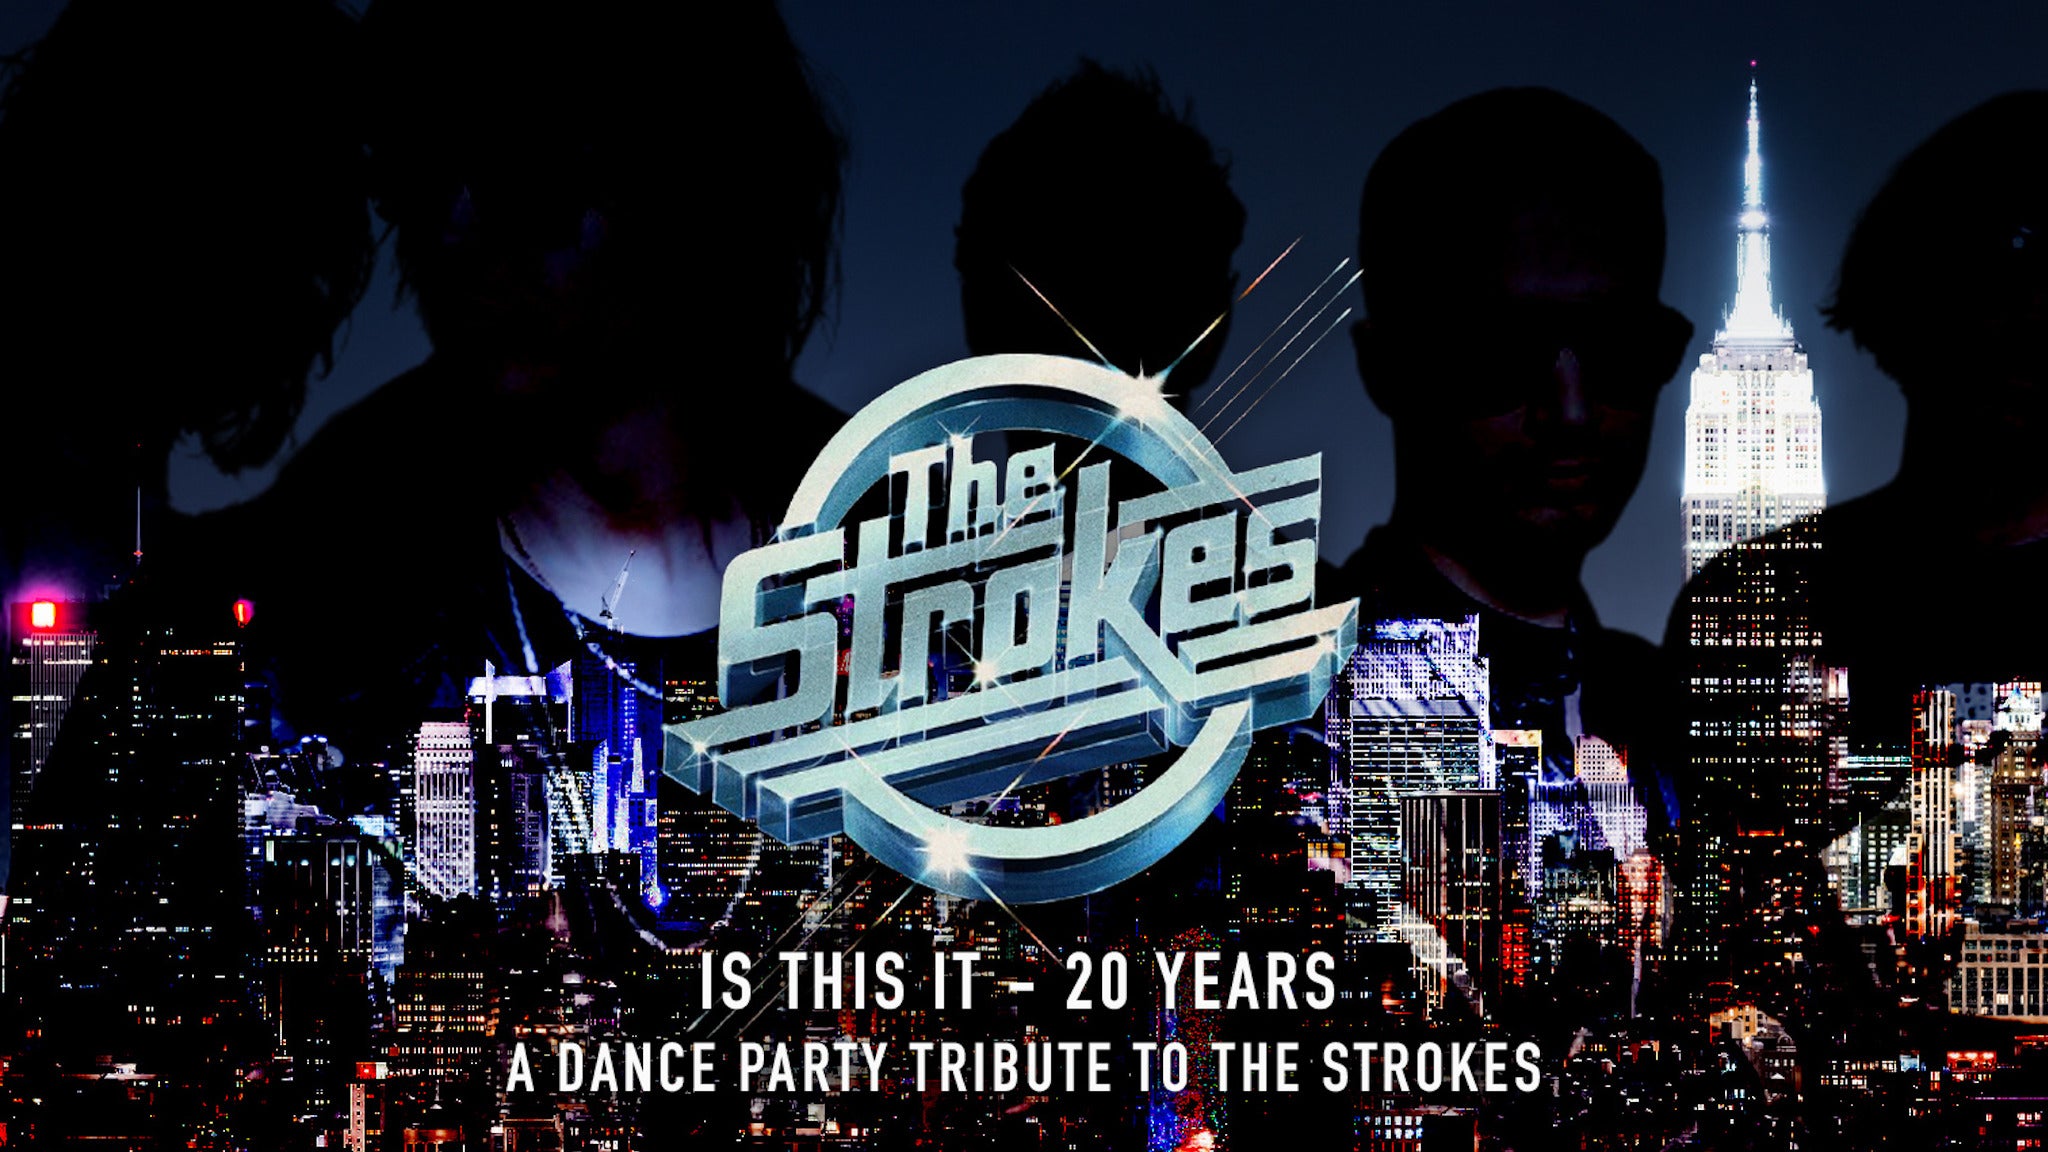 Is This It - The Strokes Dance Party 20th Anniversary Spectacular